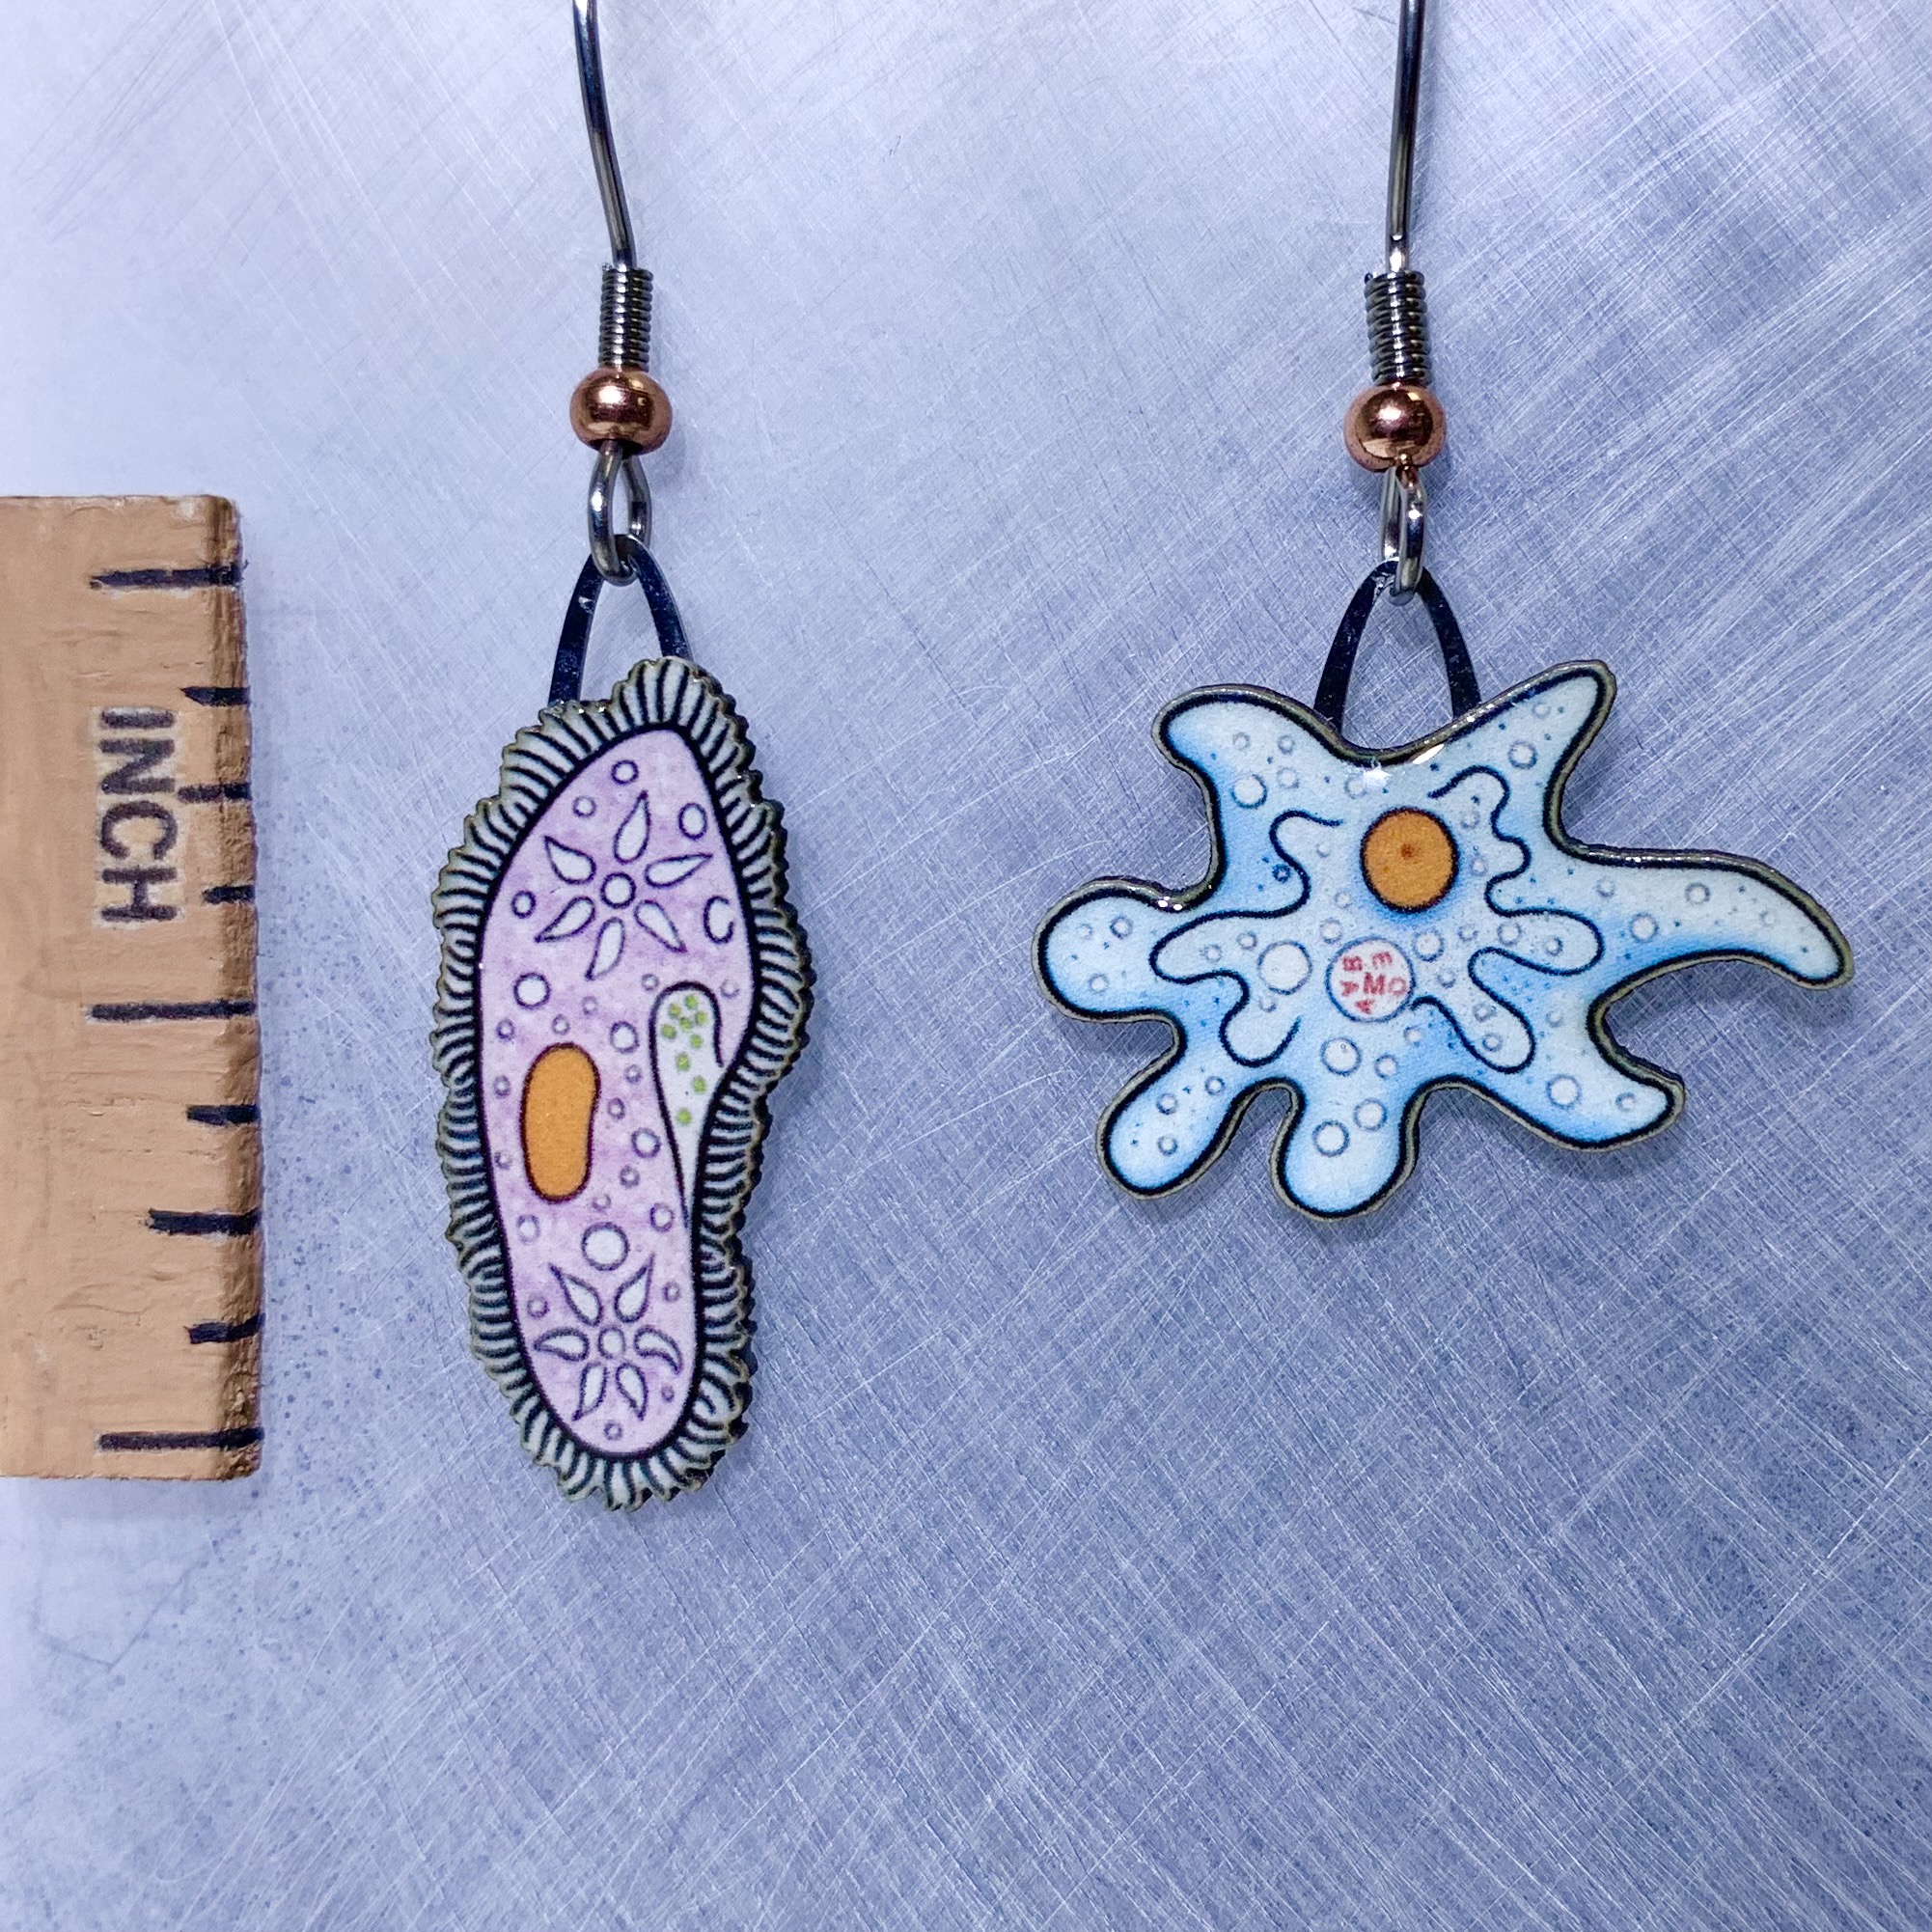 Picture shown is of 1 inch tall pair of earrings of Paramecium & Amoeba.